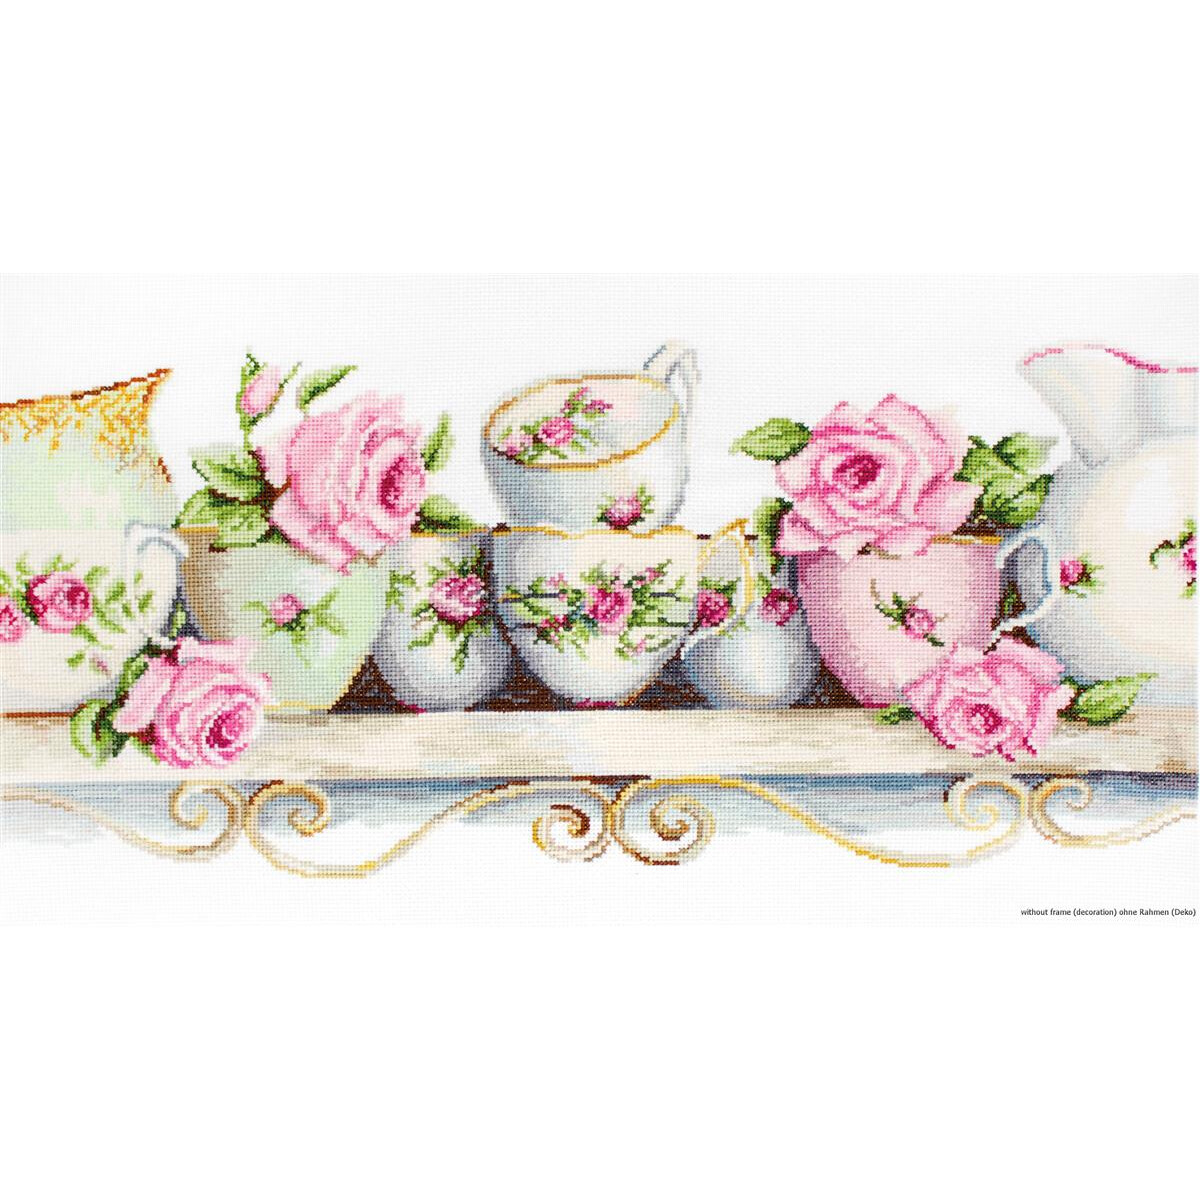 Luca-S counted Cross Stitch kit "Assorted China...